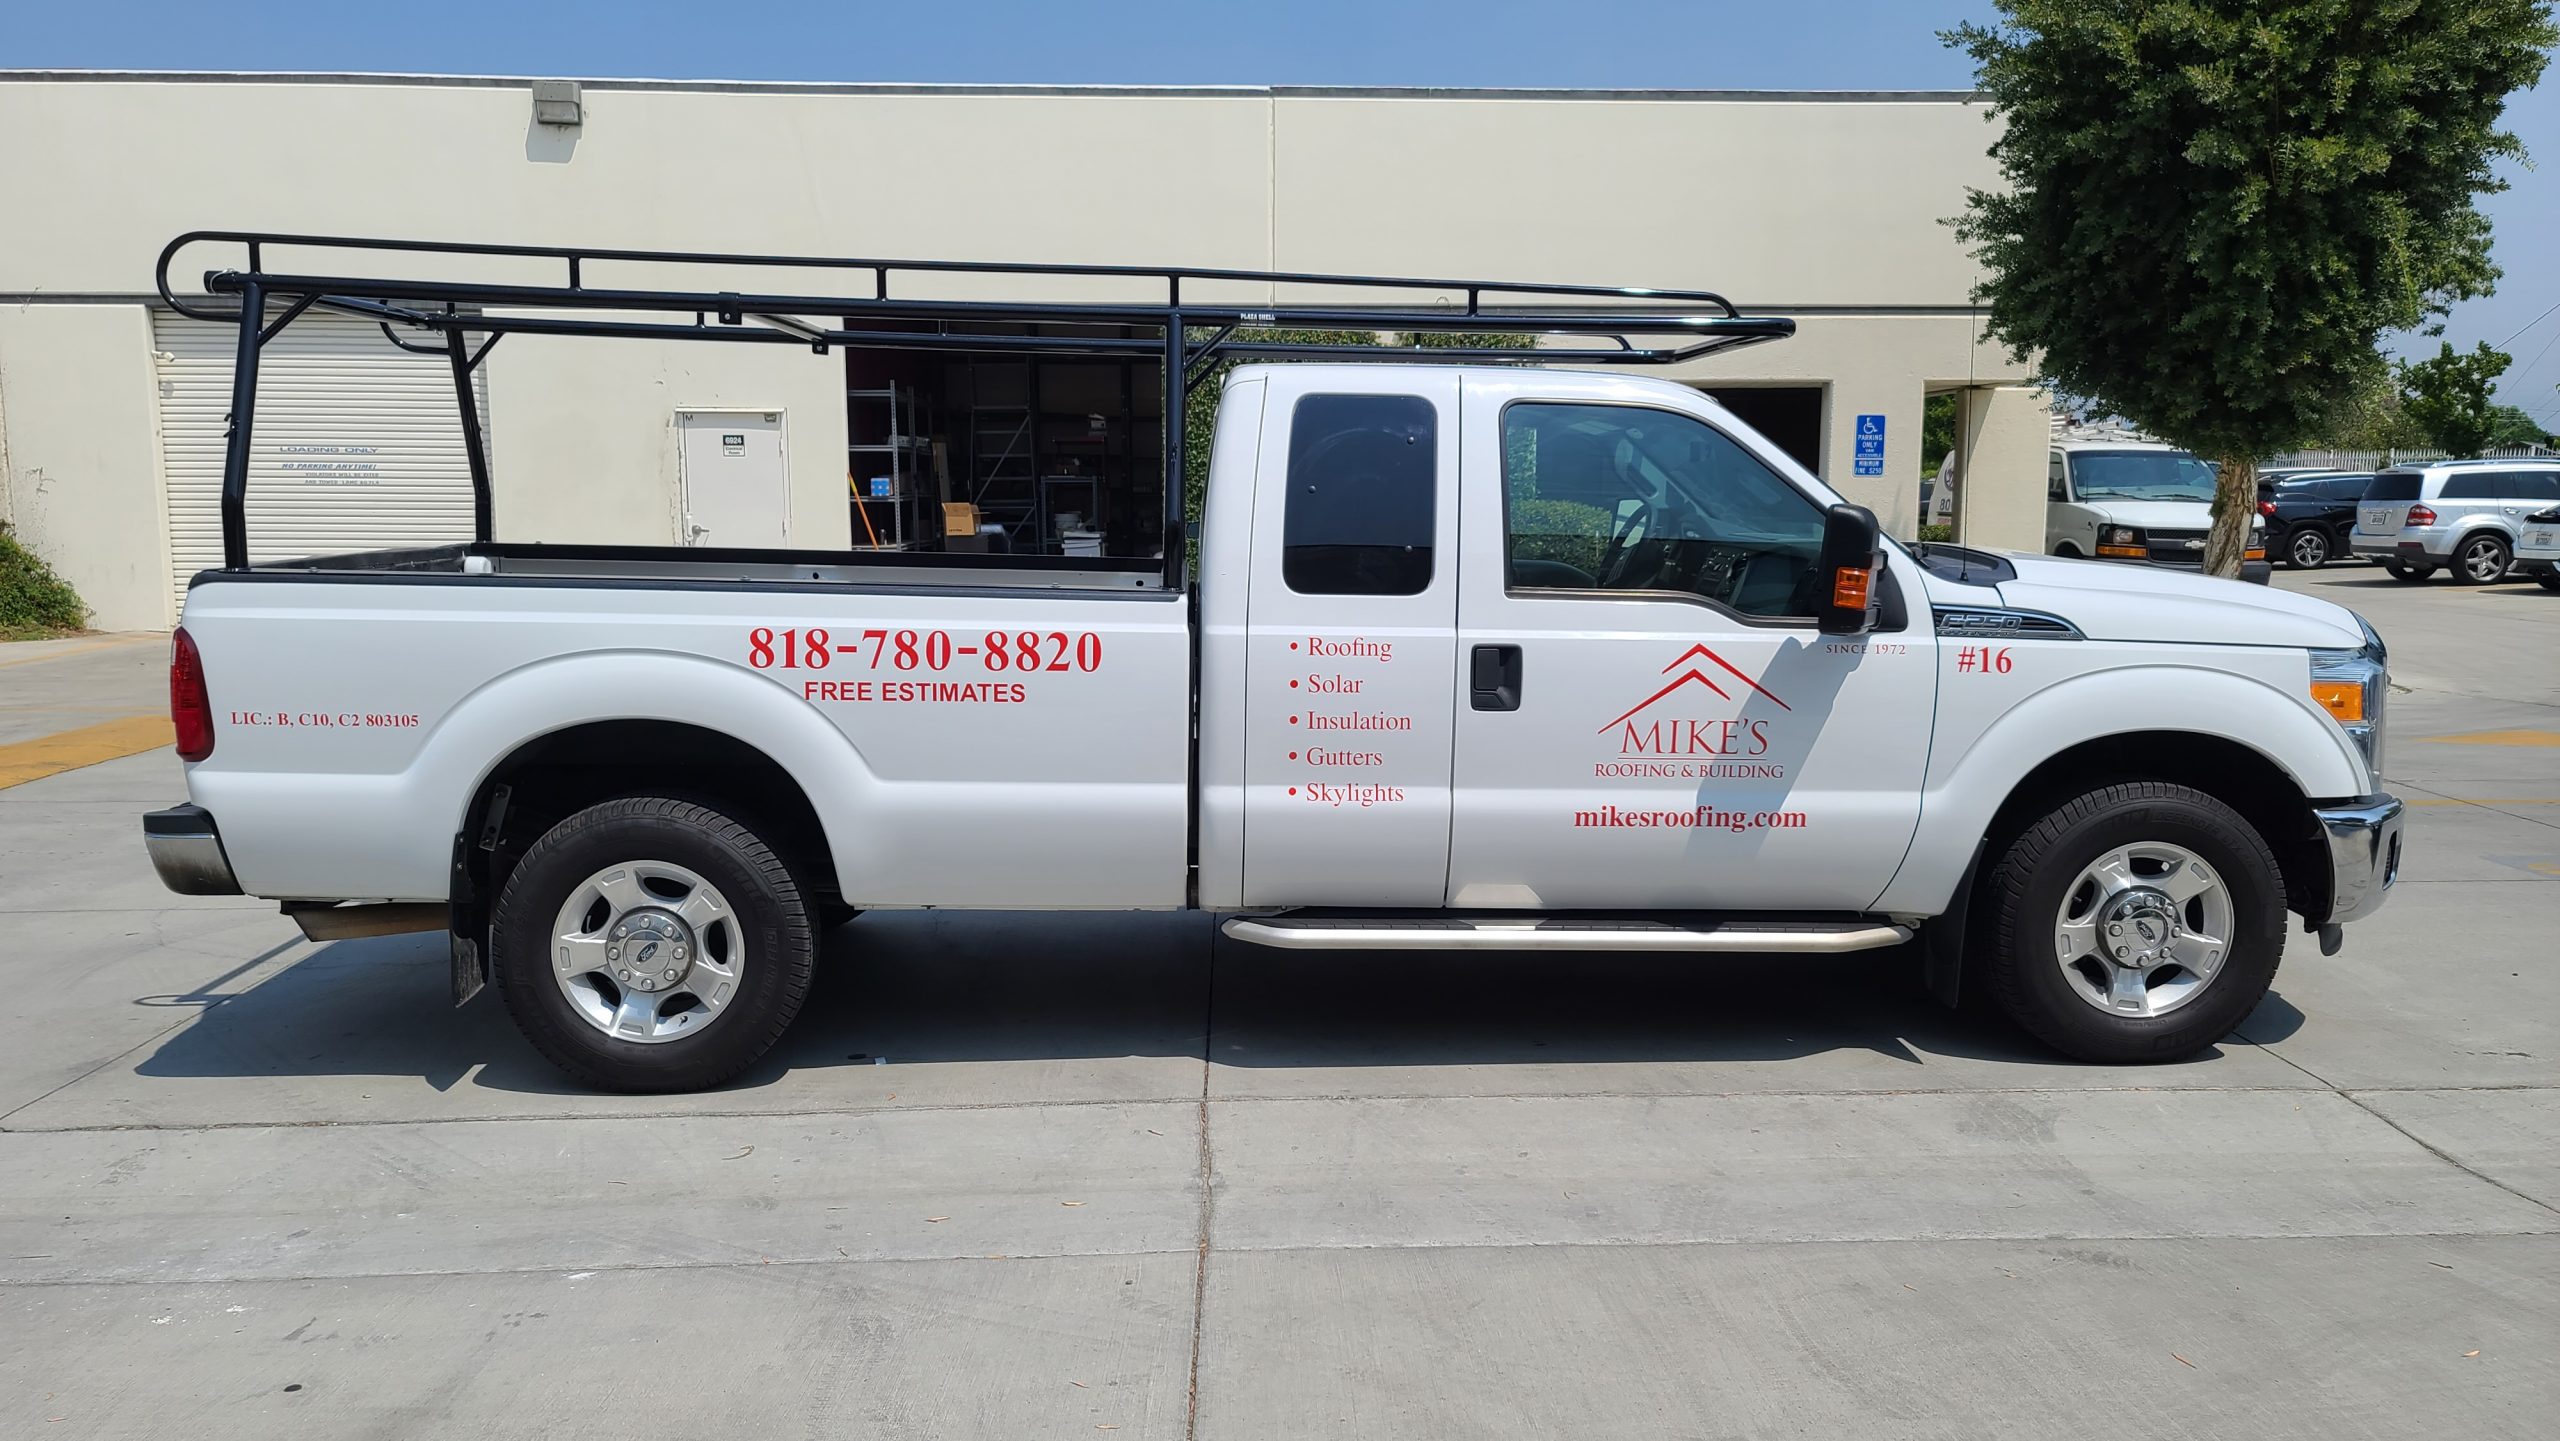 Rebranding also applies to vehicle wraps and graphics, like these new car decals for Mike Roofing's service truck featuring their logo and contact details.